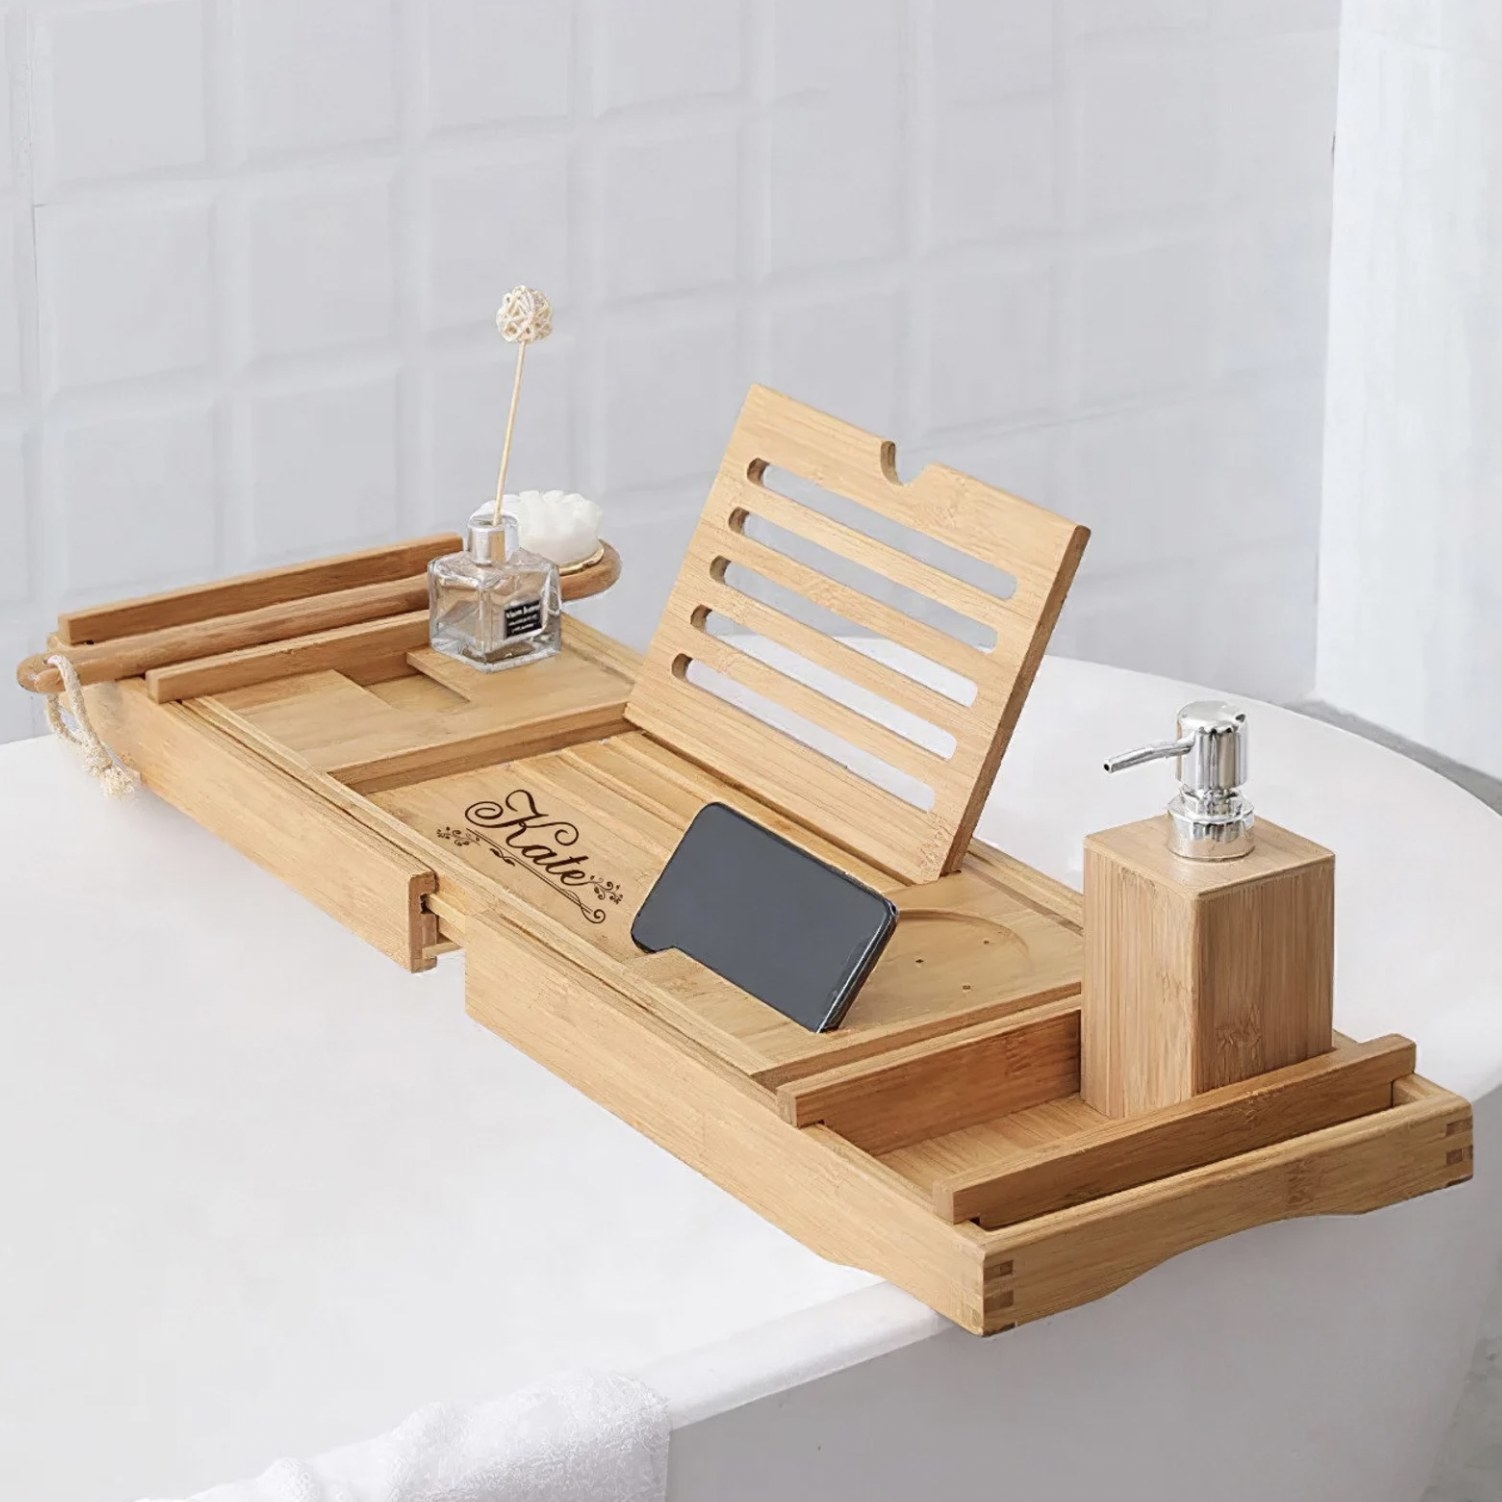 The tray on tub engraved with Kate and holding phone, brushes, and soap